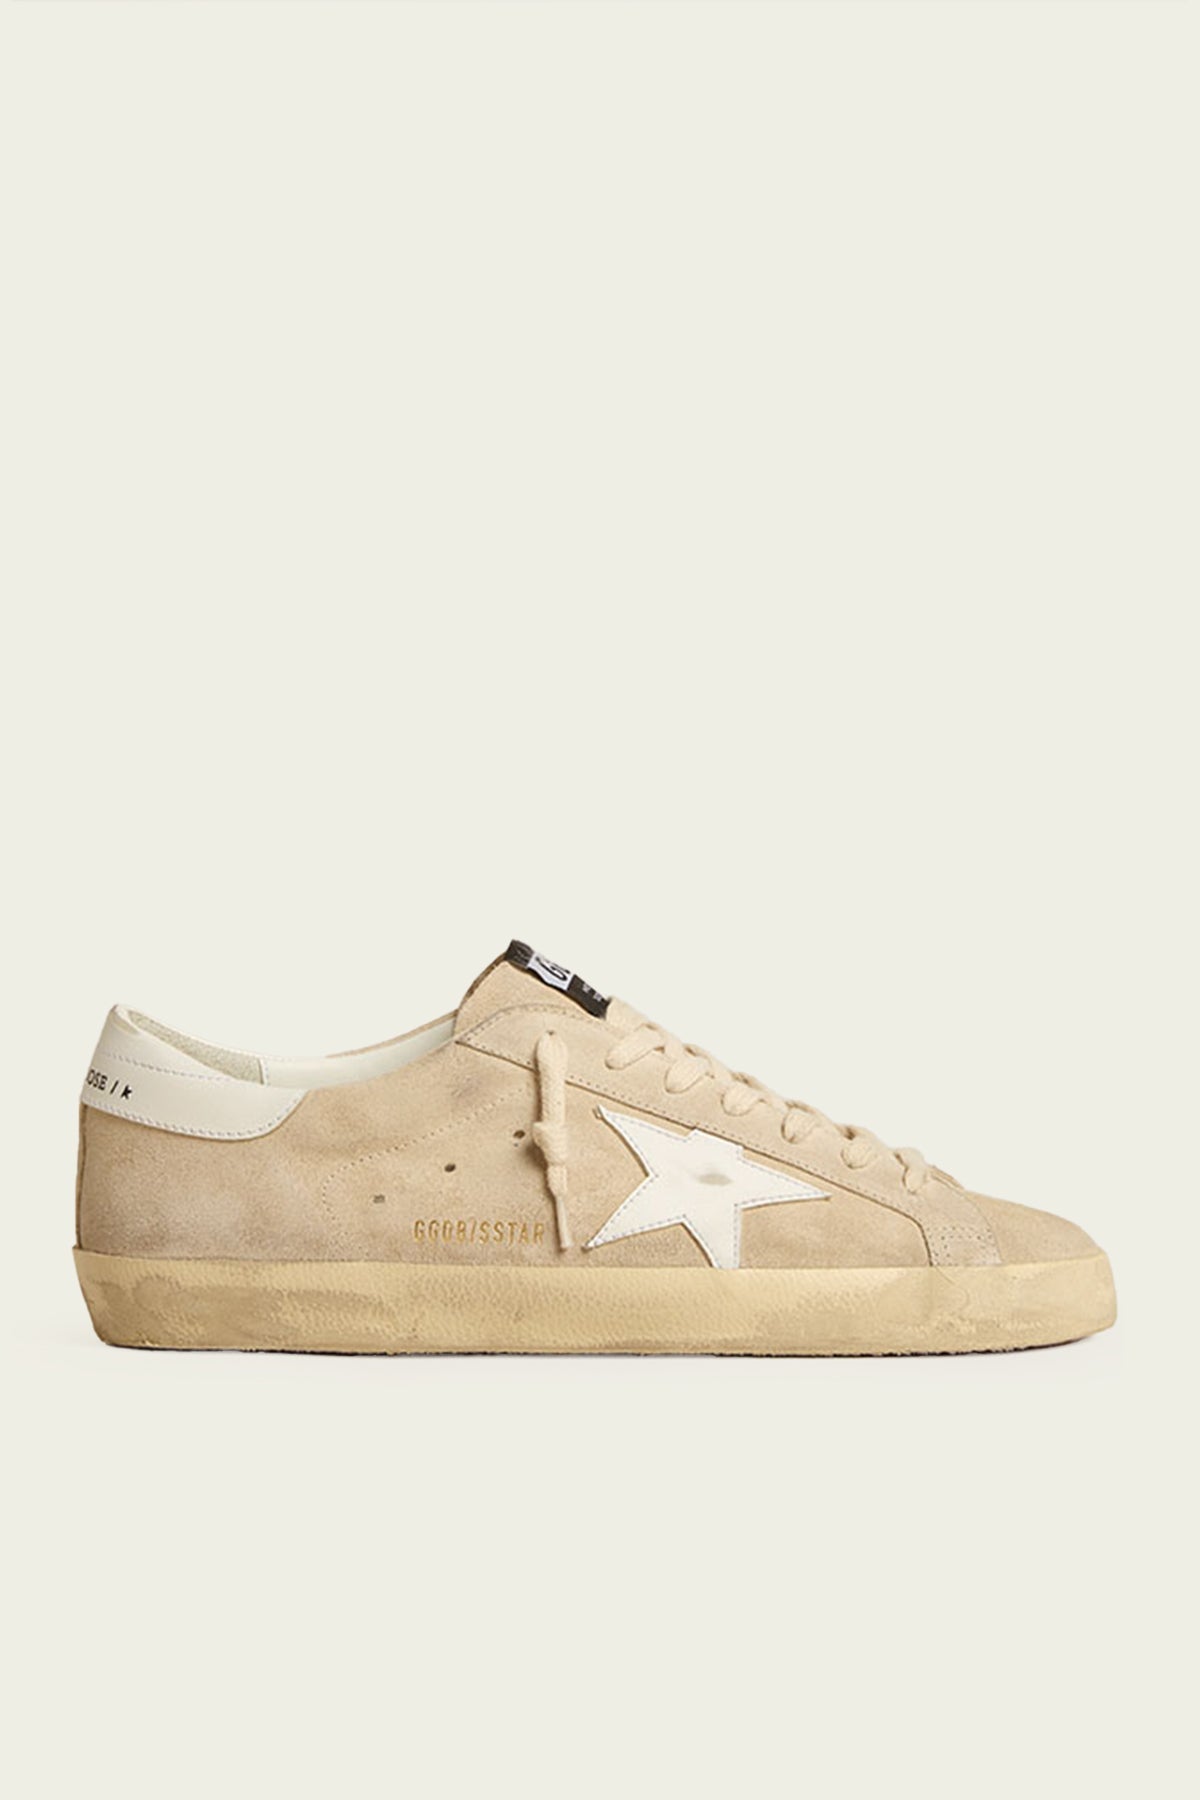 Super-Star Seed-Pearl Suede Leather Sneaker - shop-olivia.com